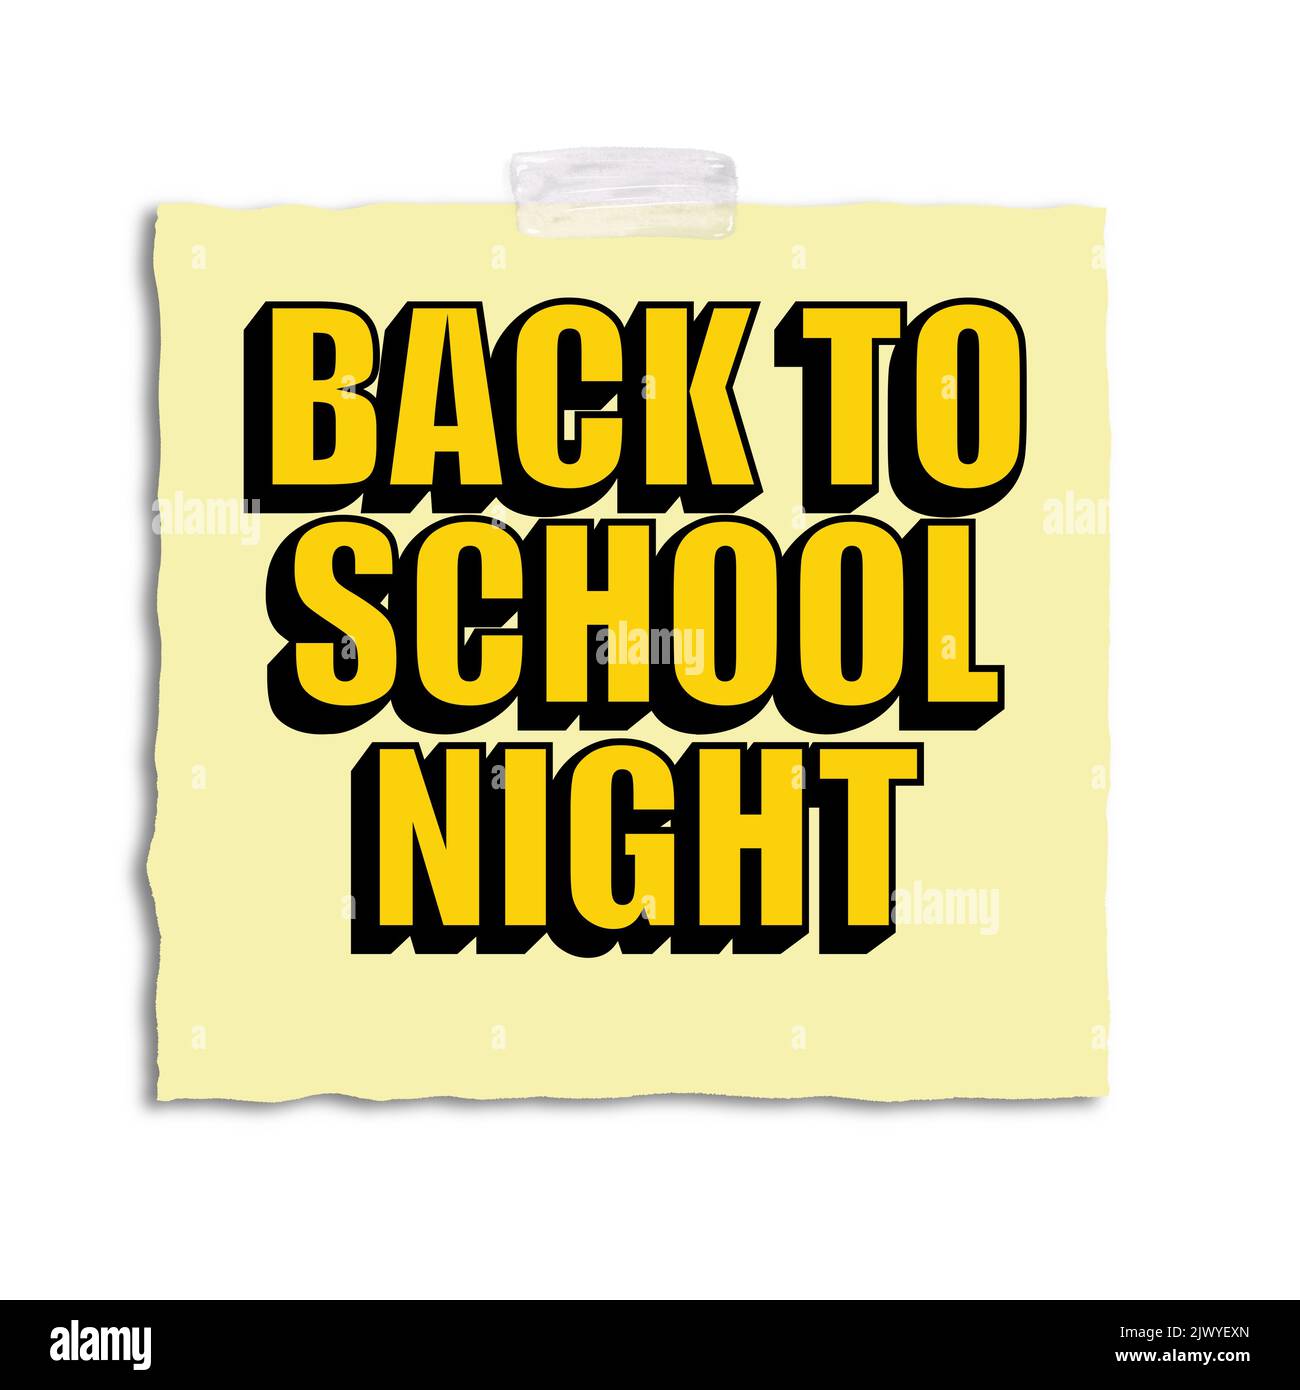 Back to school night yellow memo with tape on white background Stock Photo